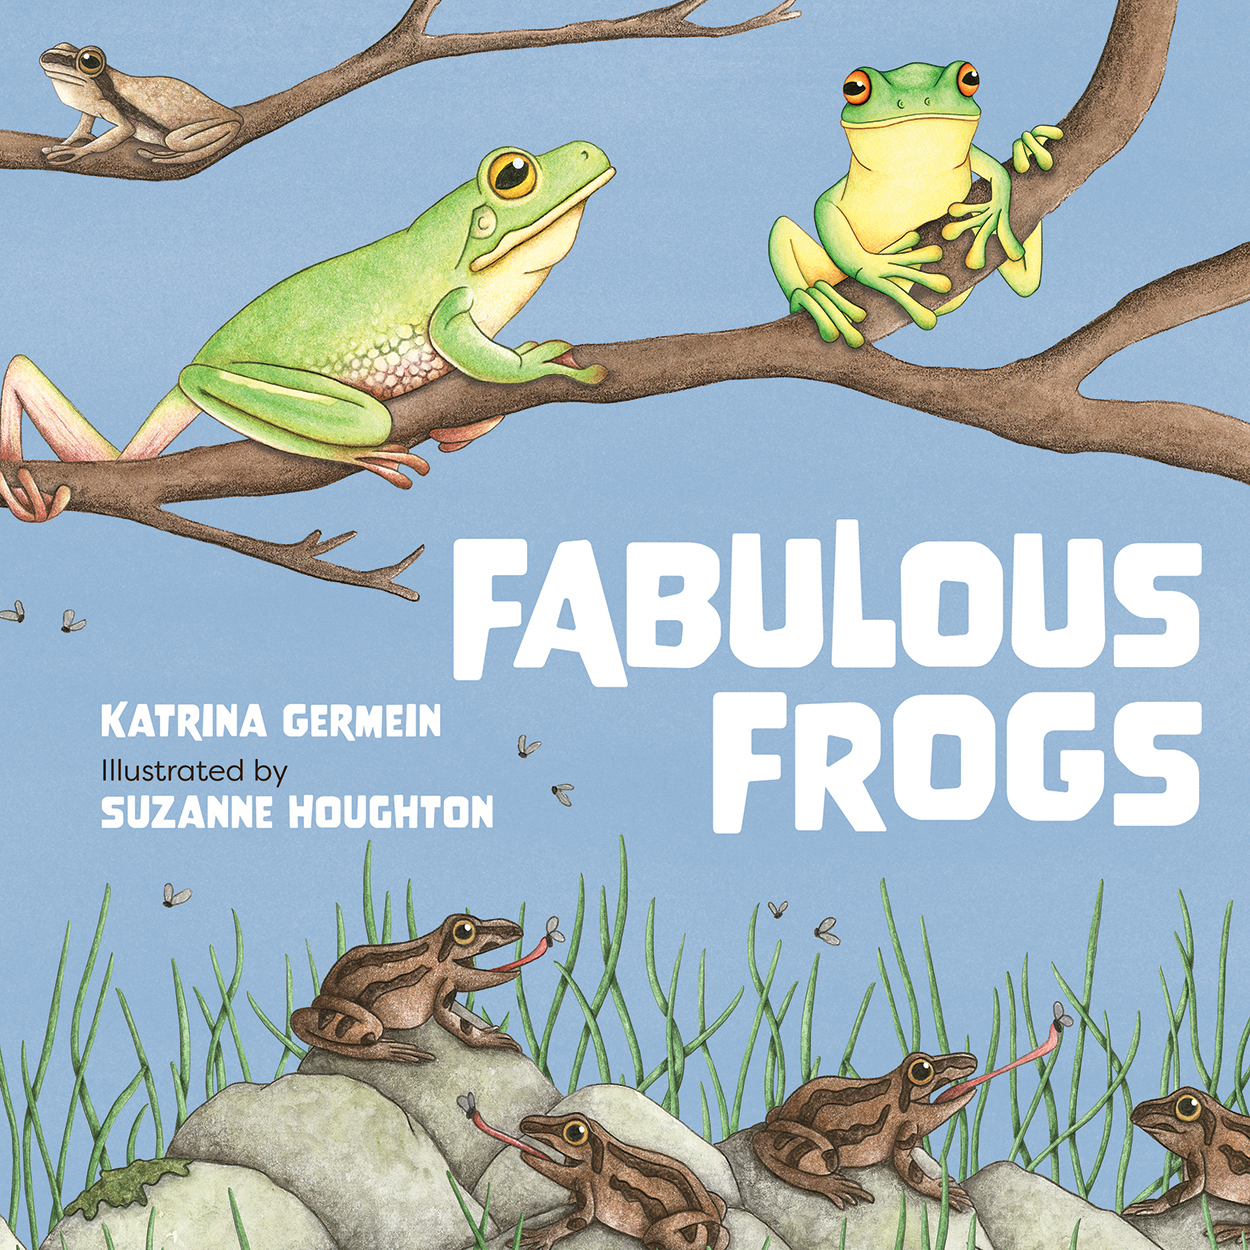 Cover of 'Fabulous Frogs' showing a variety of frogs in different environments.